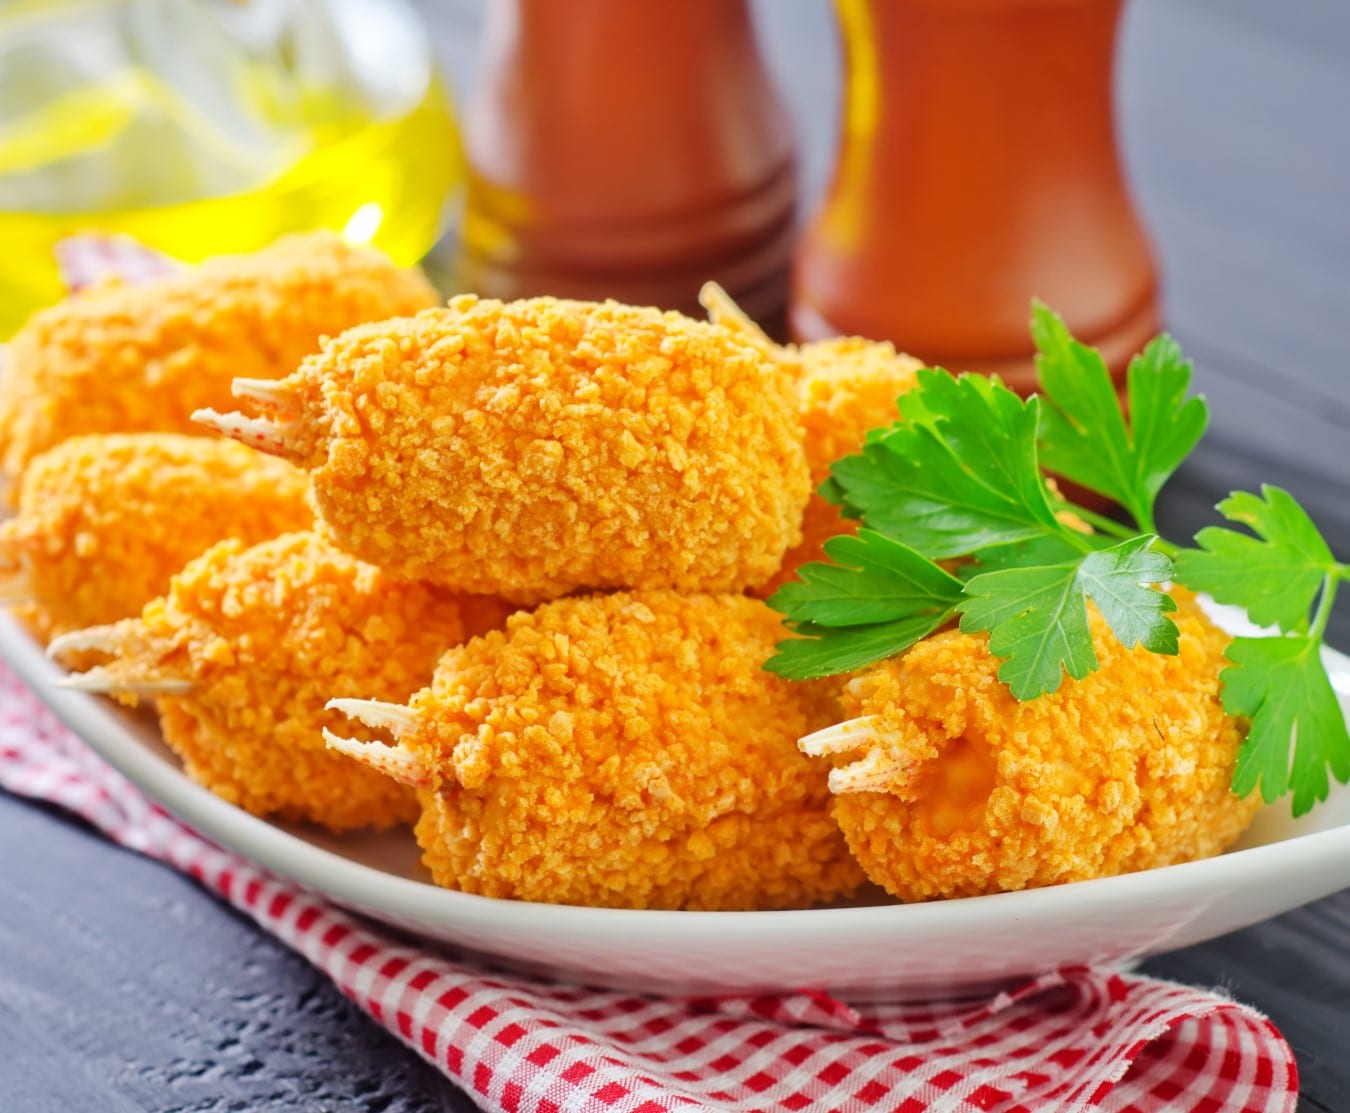 Buy Breaded Crab Claws 1kg Online at the Best Price, Free UK Delivery -  Bradley's Fish